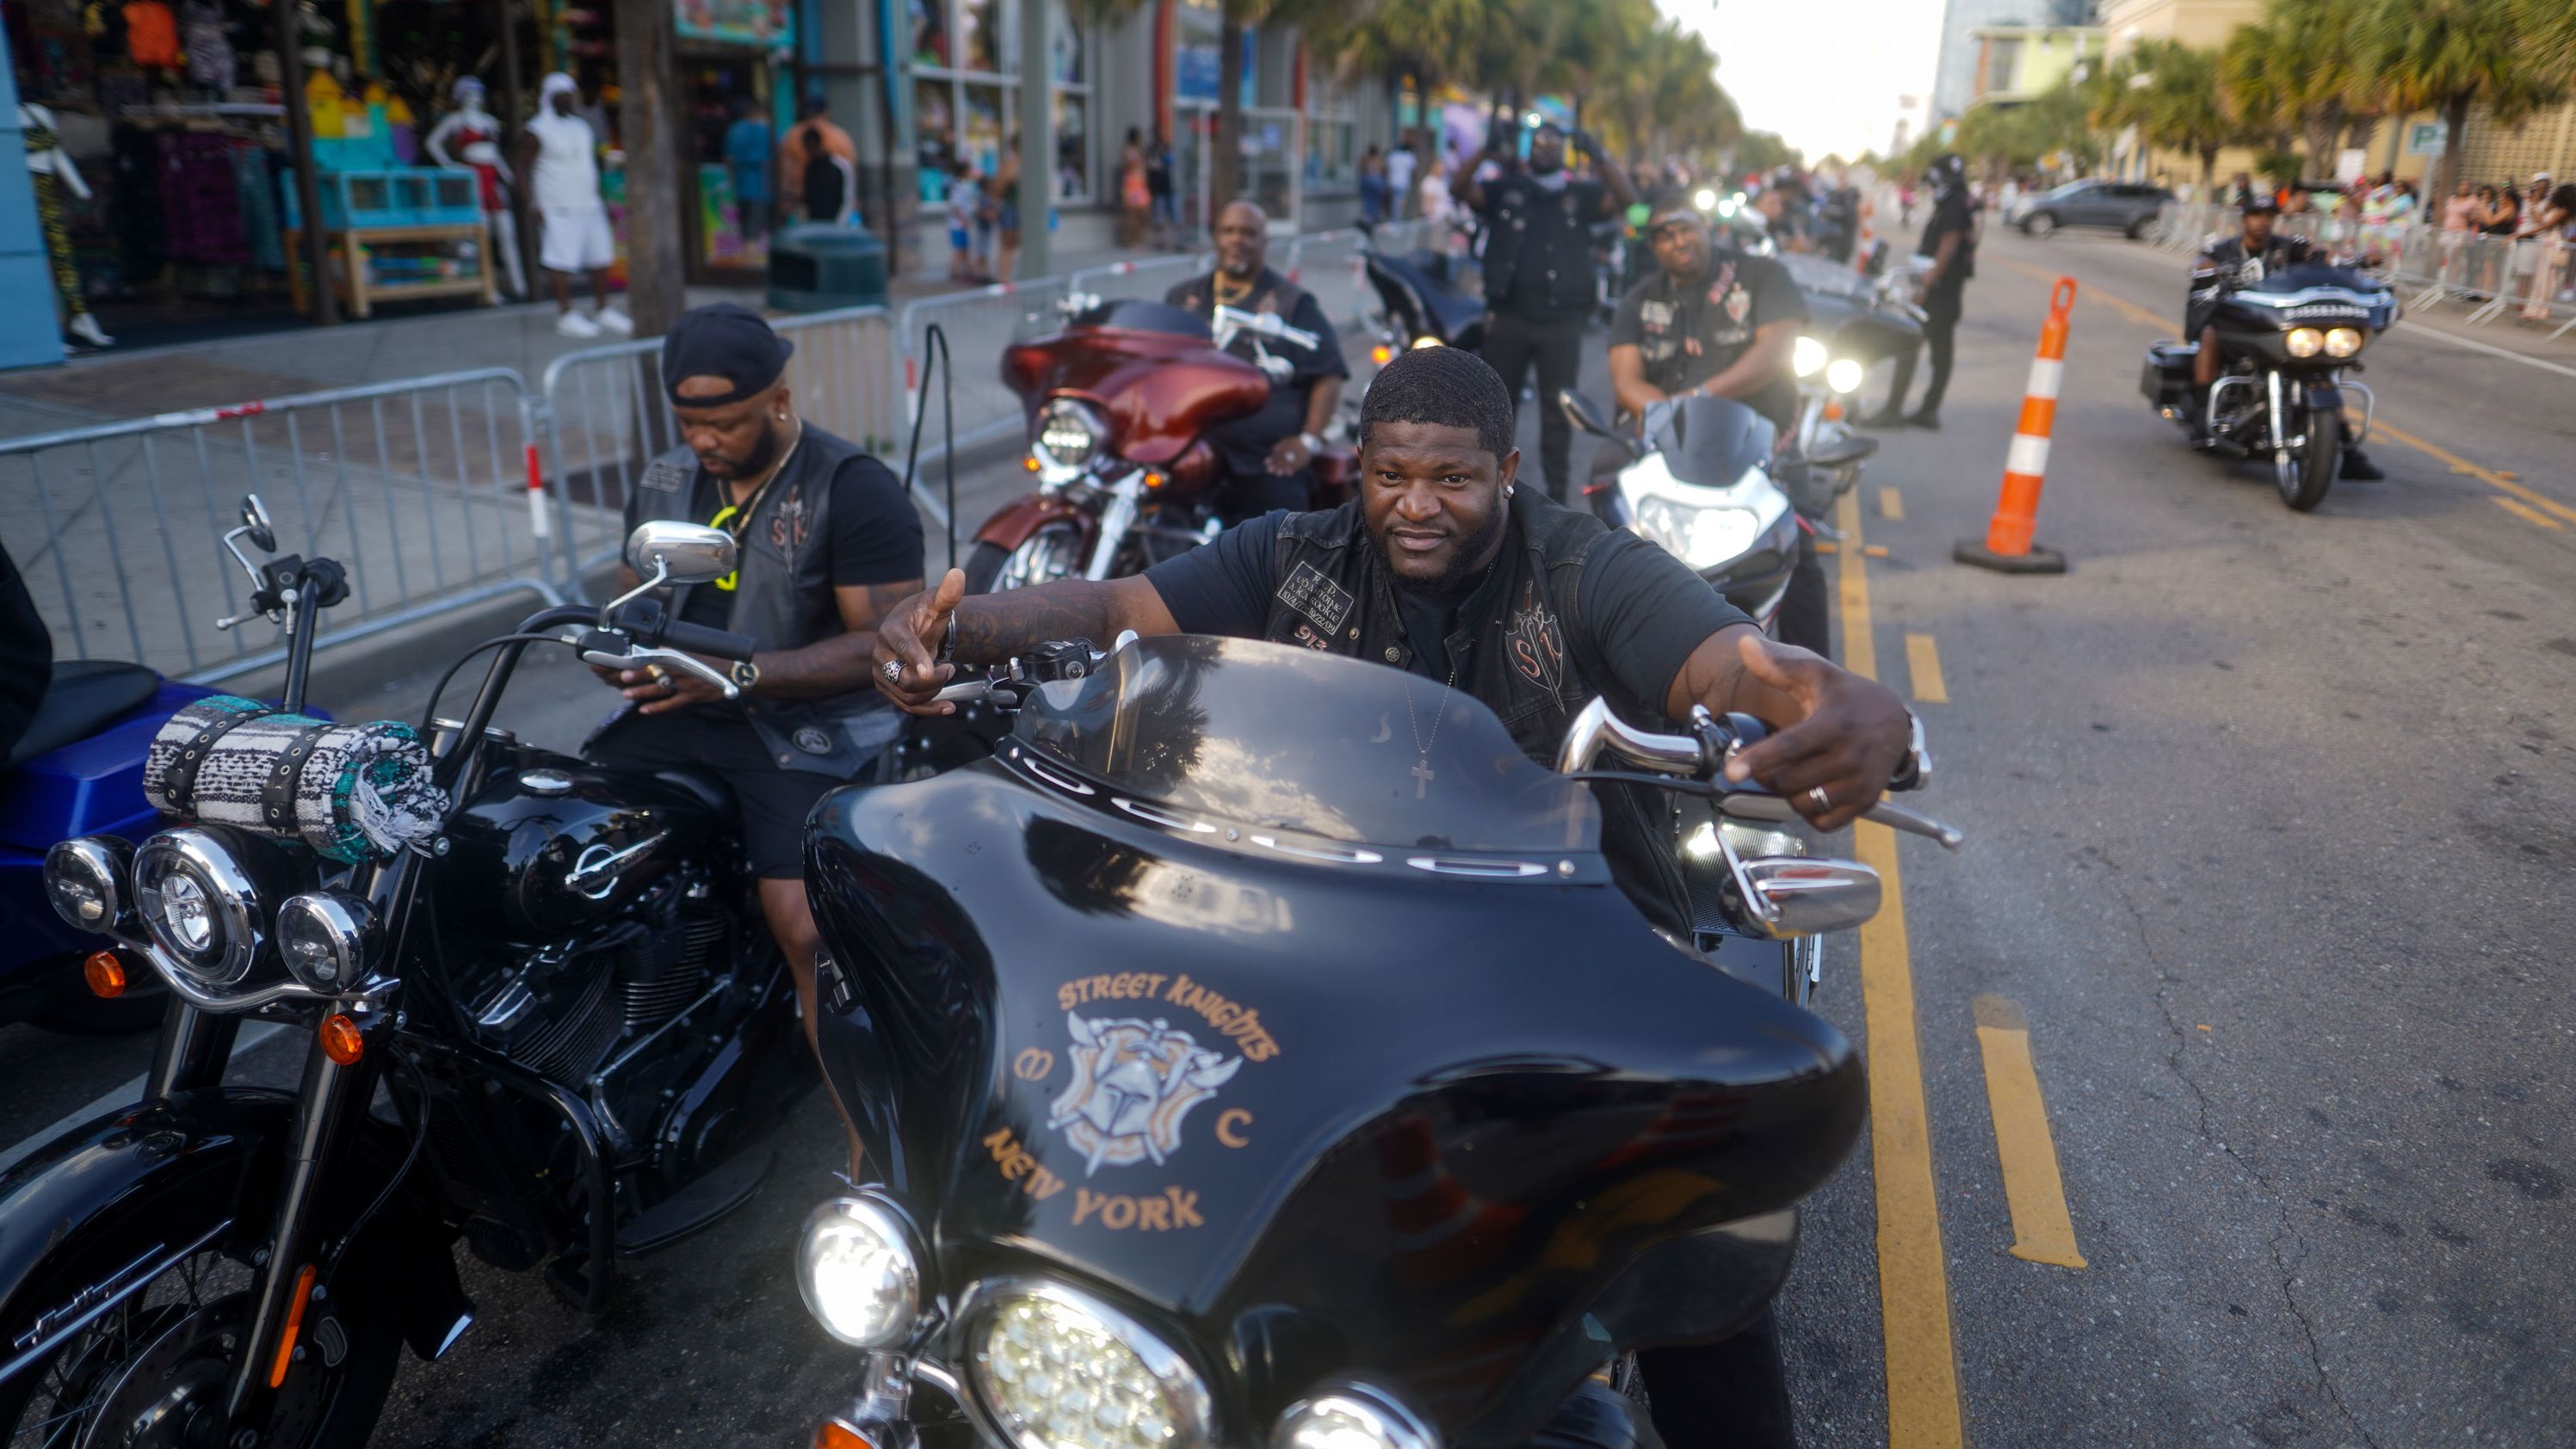 Motorcyclists wait for traffic along North Ocean Boulevard in Myrtle Beach, South Carolina.